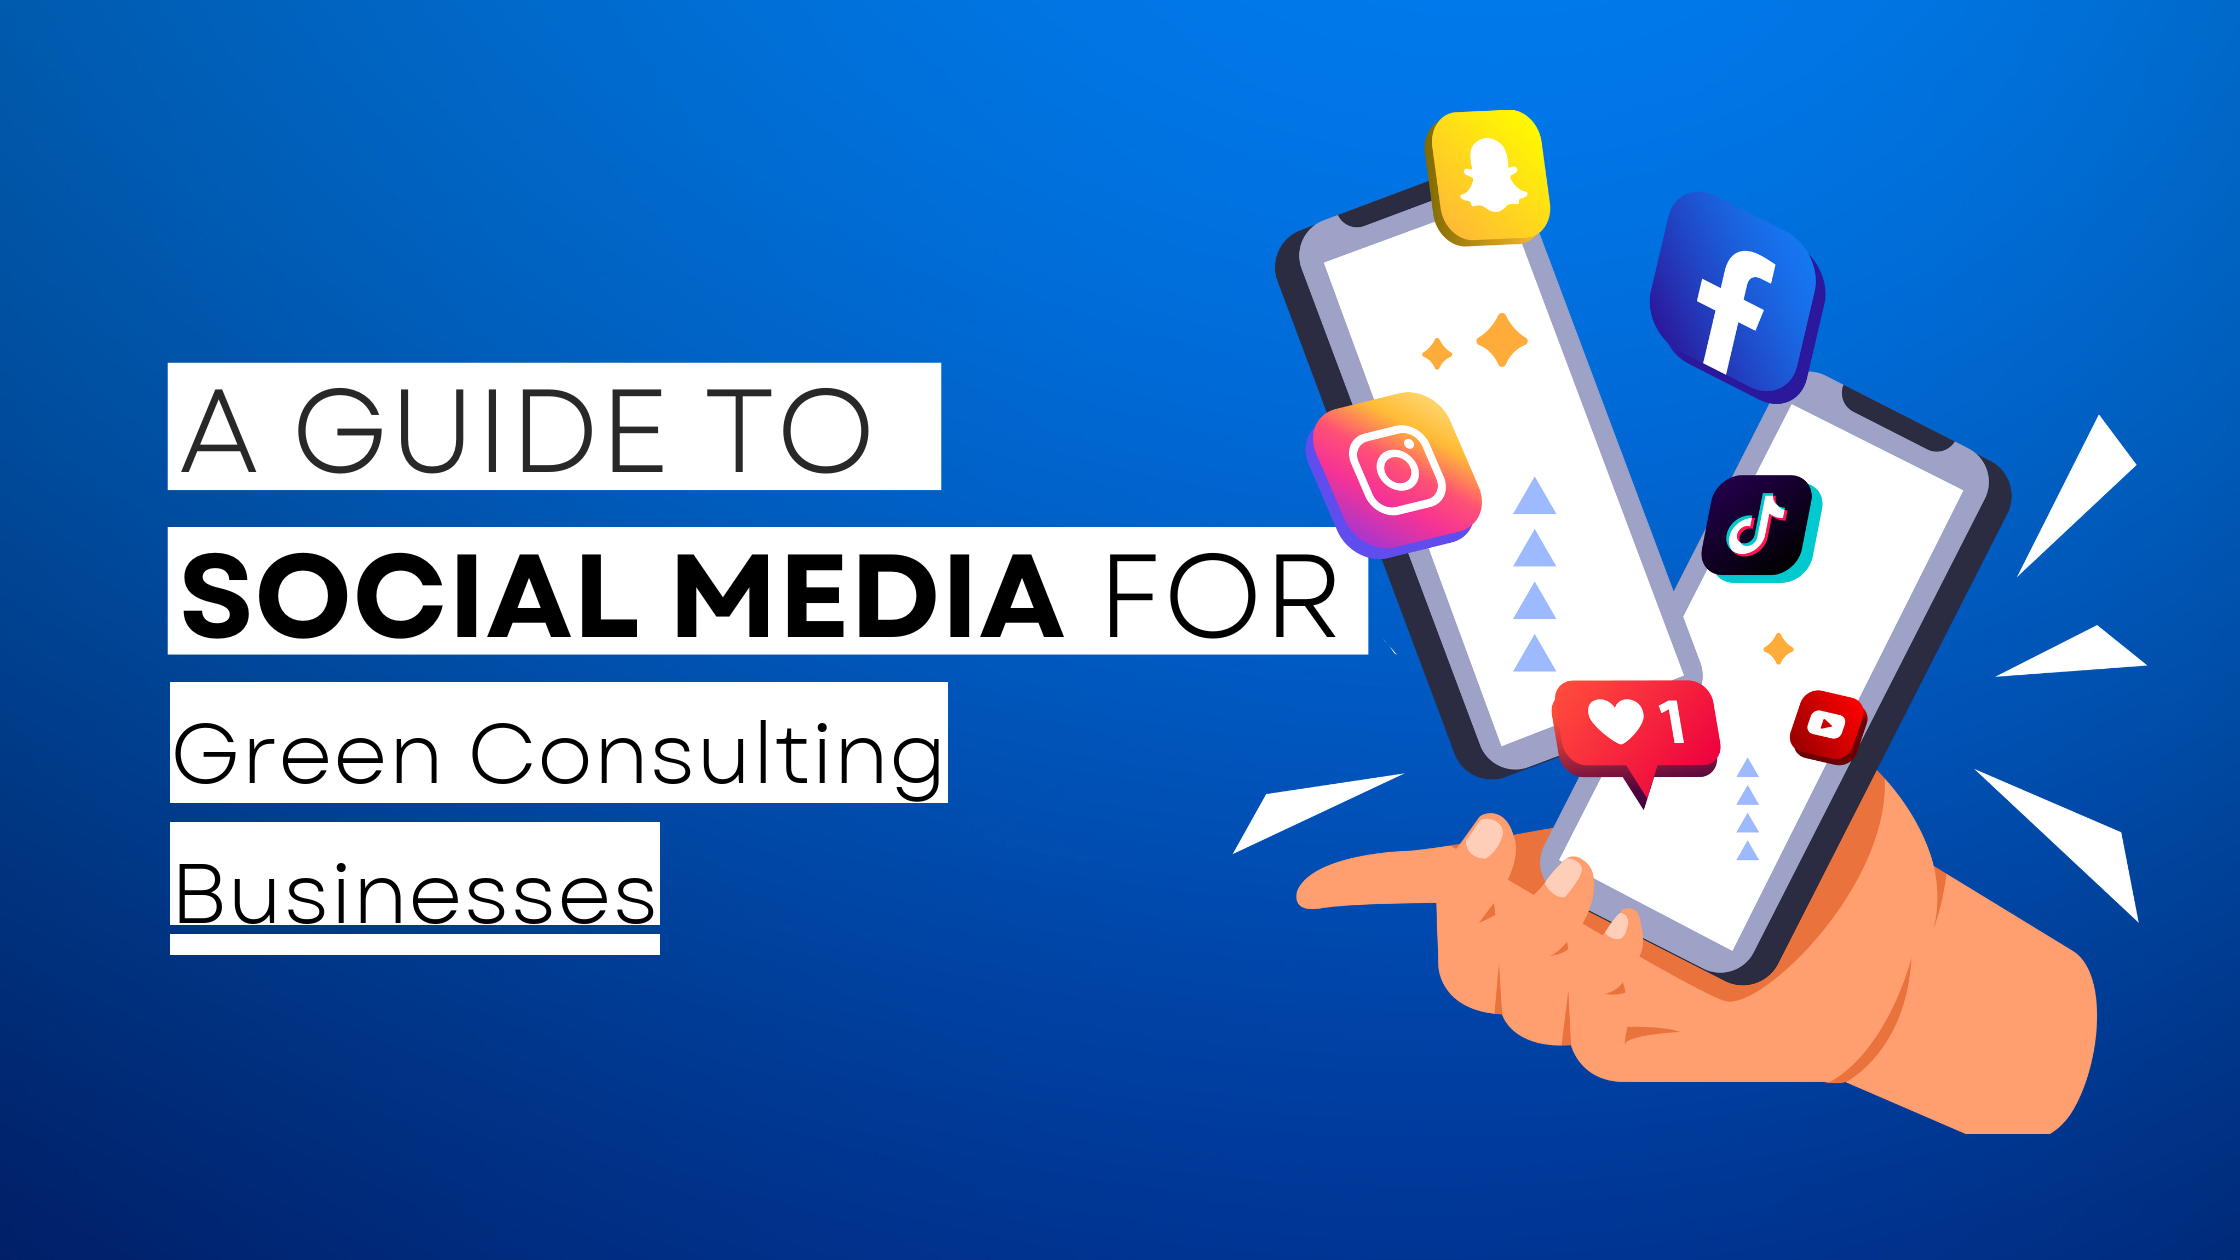 How to start Green Consulting  on social media